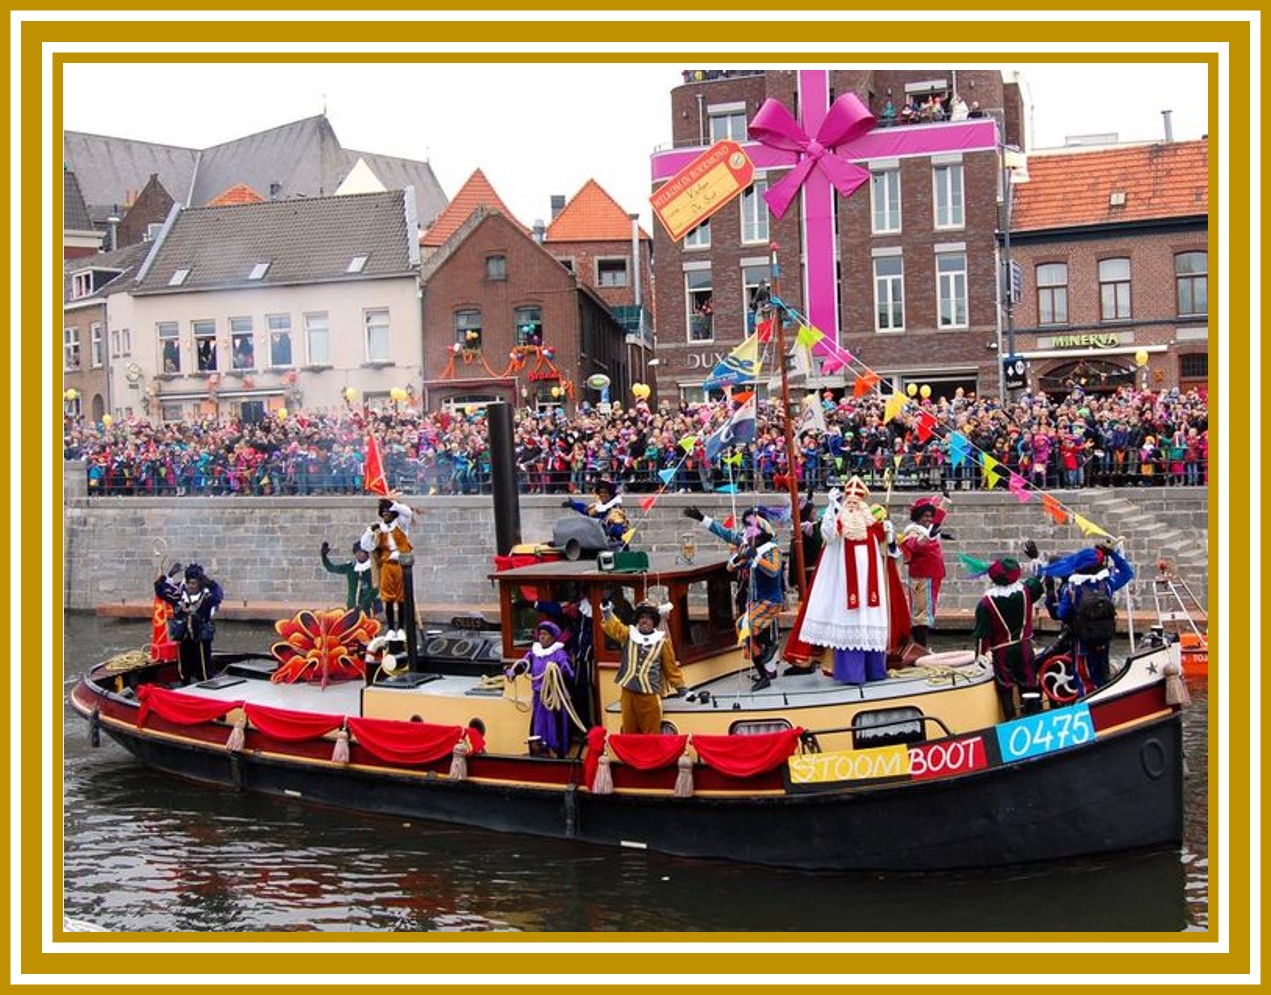 Sinterklass arrives in town for Christmas while riding a boat. | OrnamentShop.com